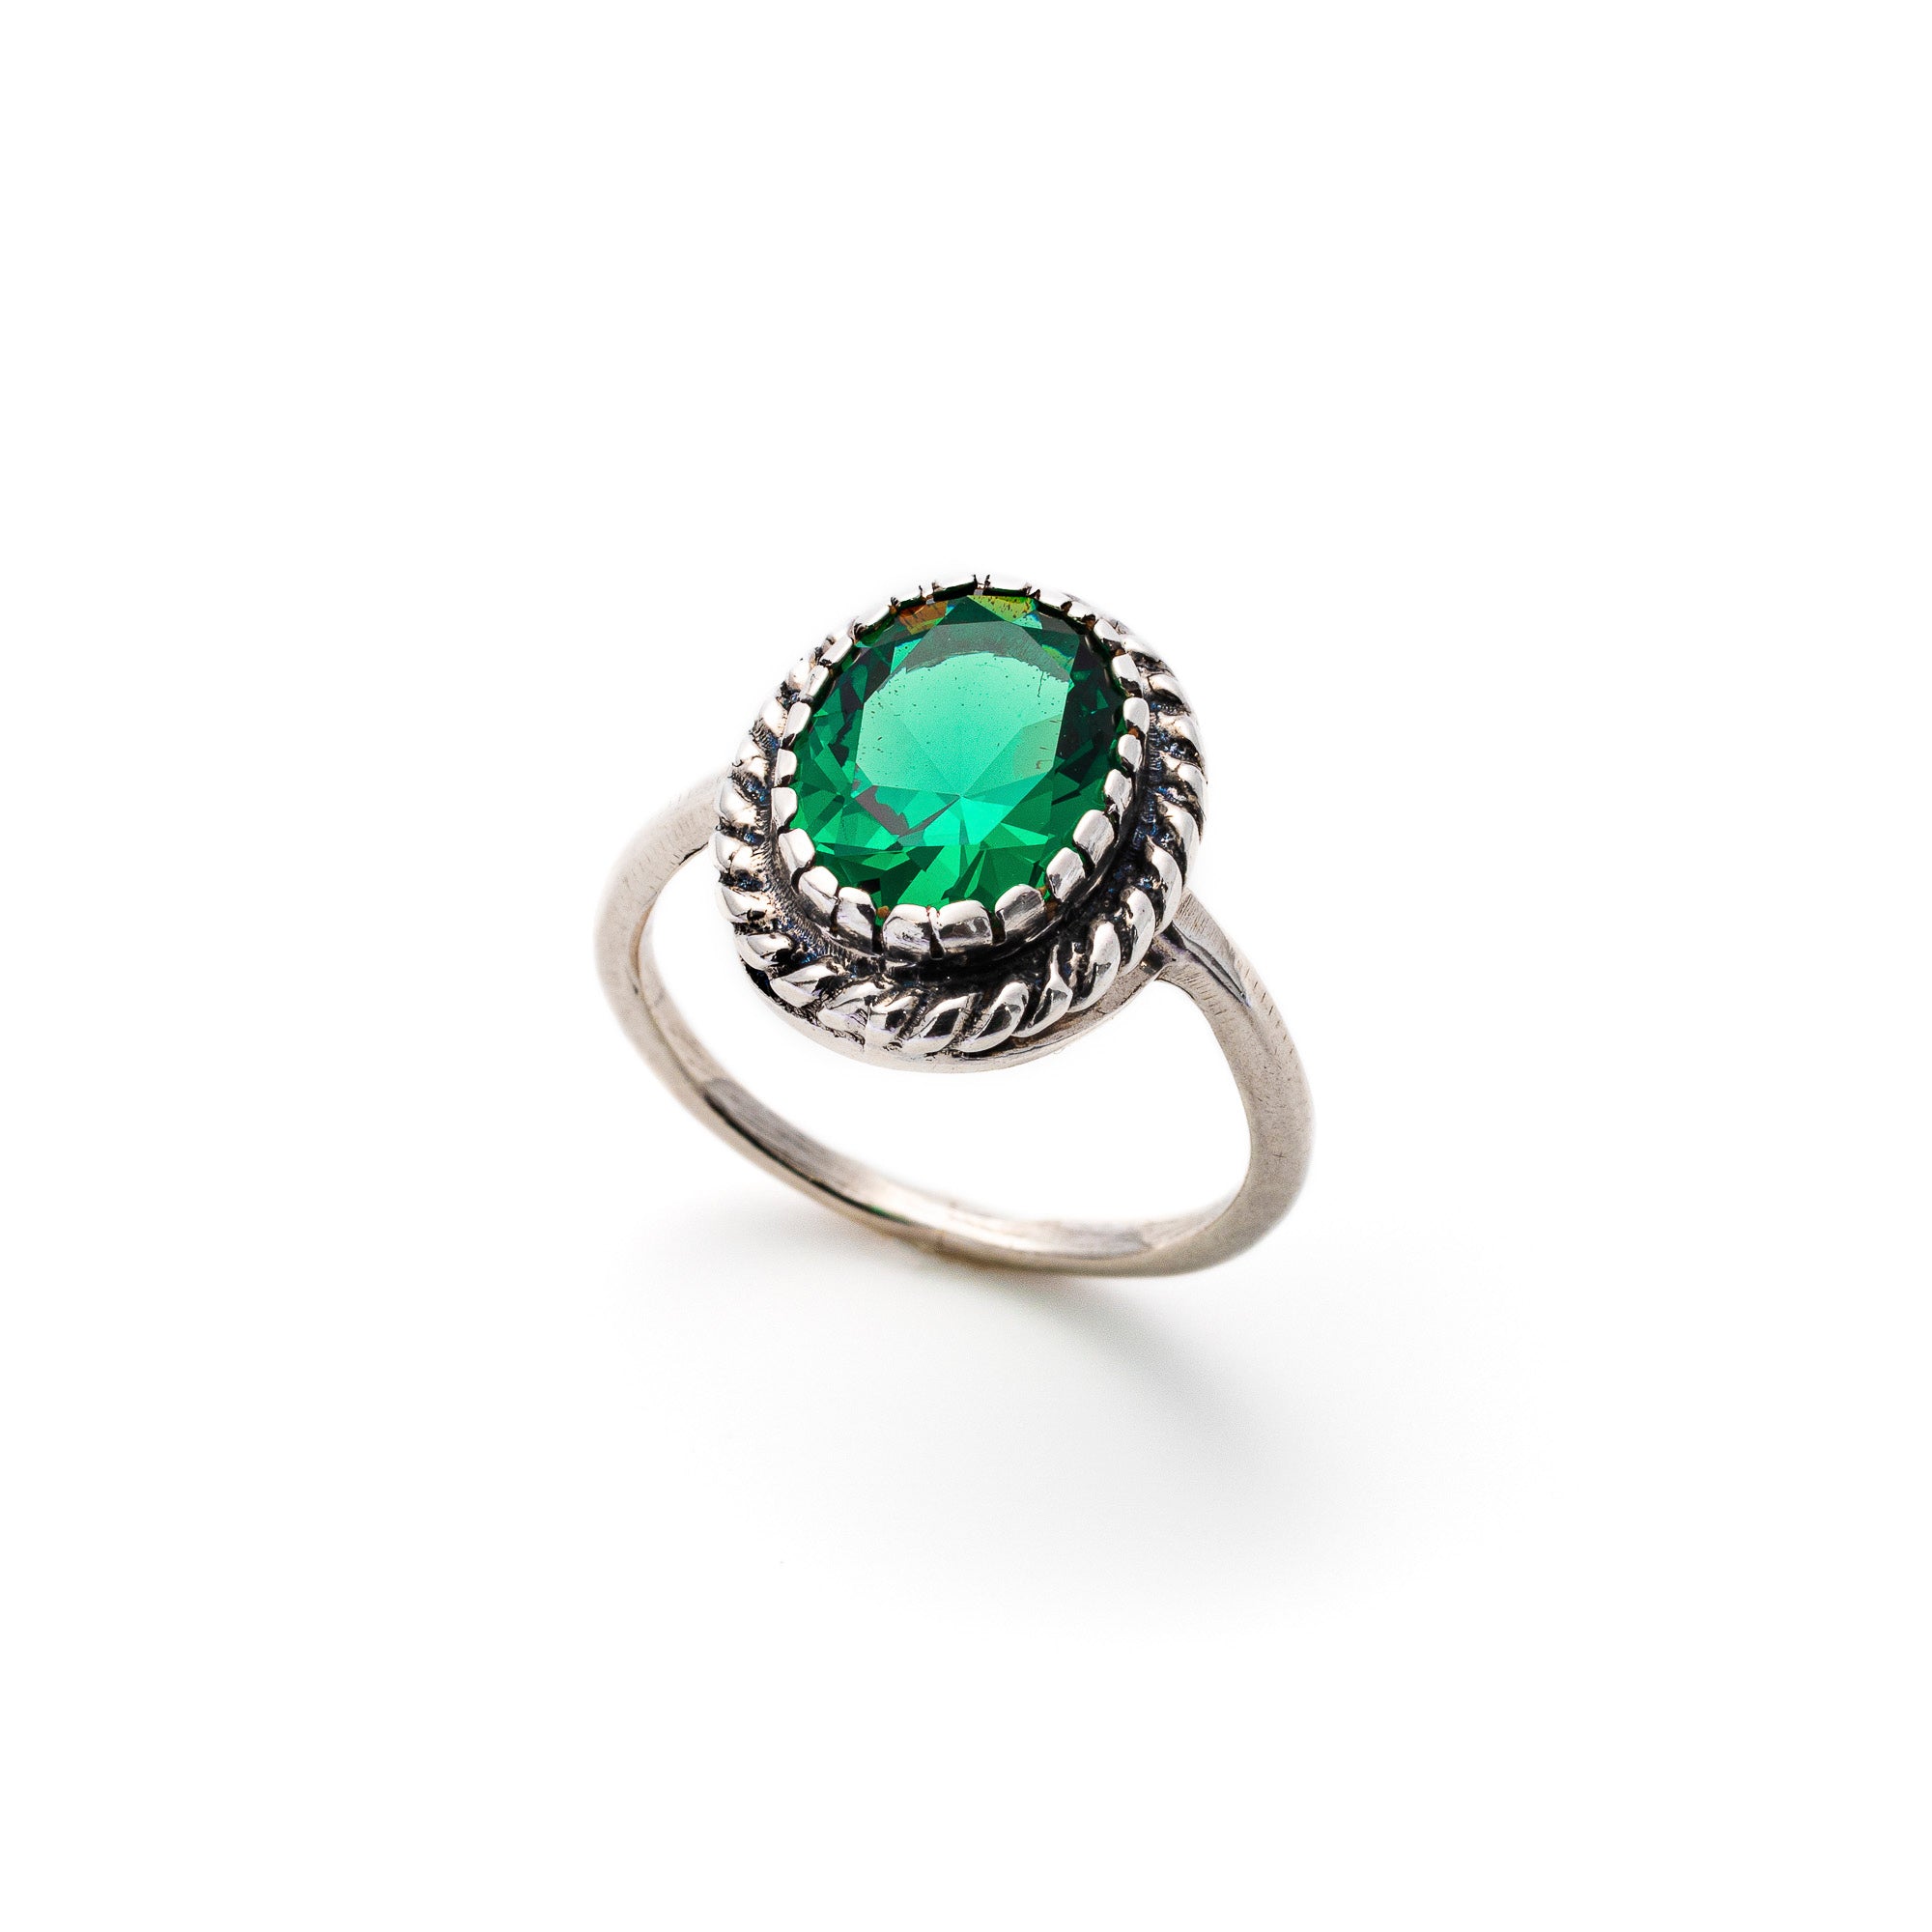 Emerald Ring, Vintage Ring, Created Emerald, Baguette Ring, Asymmetric Ring, Three Stones Ring, Stone Stackable Ring, Emerald Band, Silver